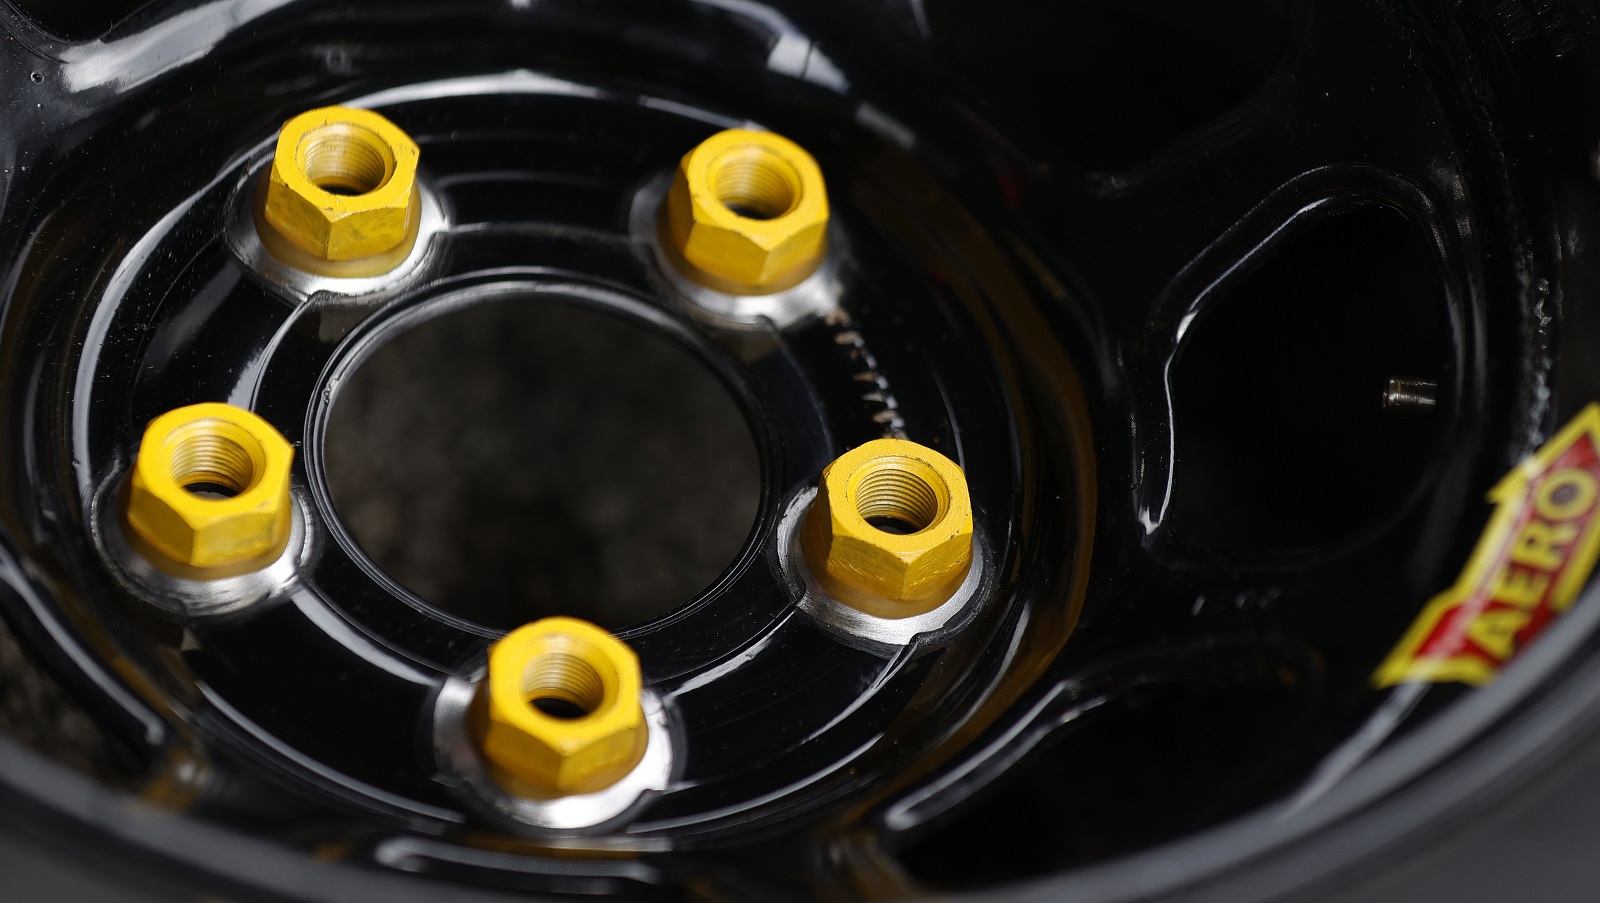 A detail of tire and lug nuts in the 23XI Racing Toyota pit area prior to the 2021 Daytona 500. | Jared C. Tilton/Getty Images